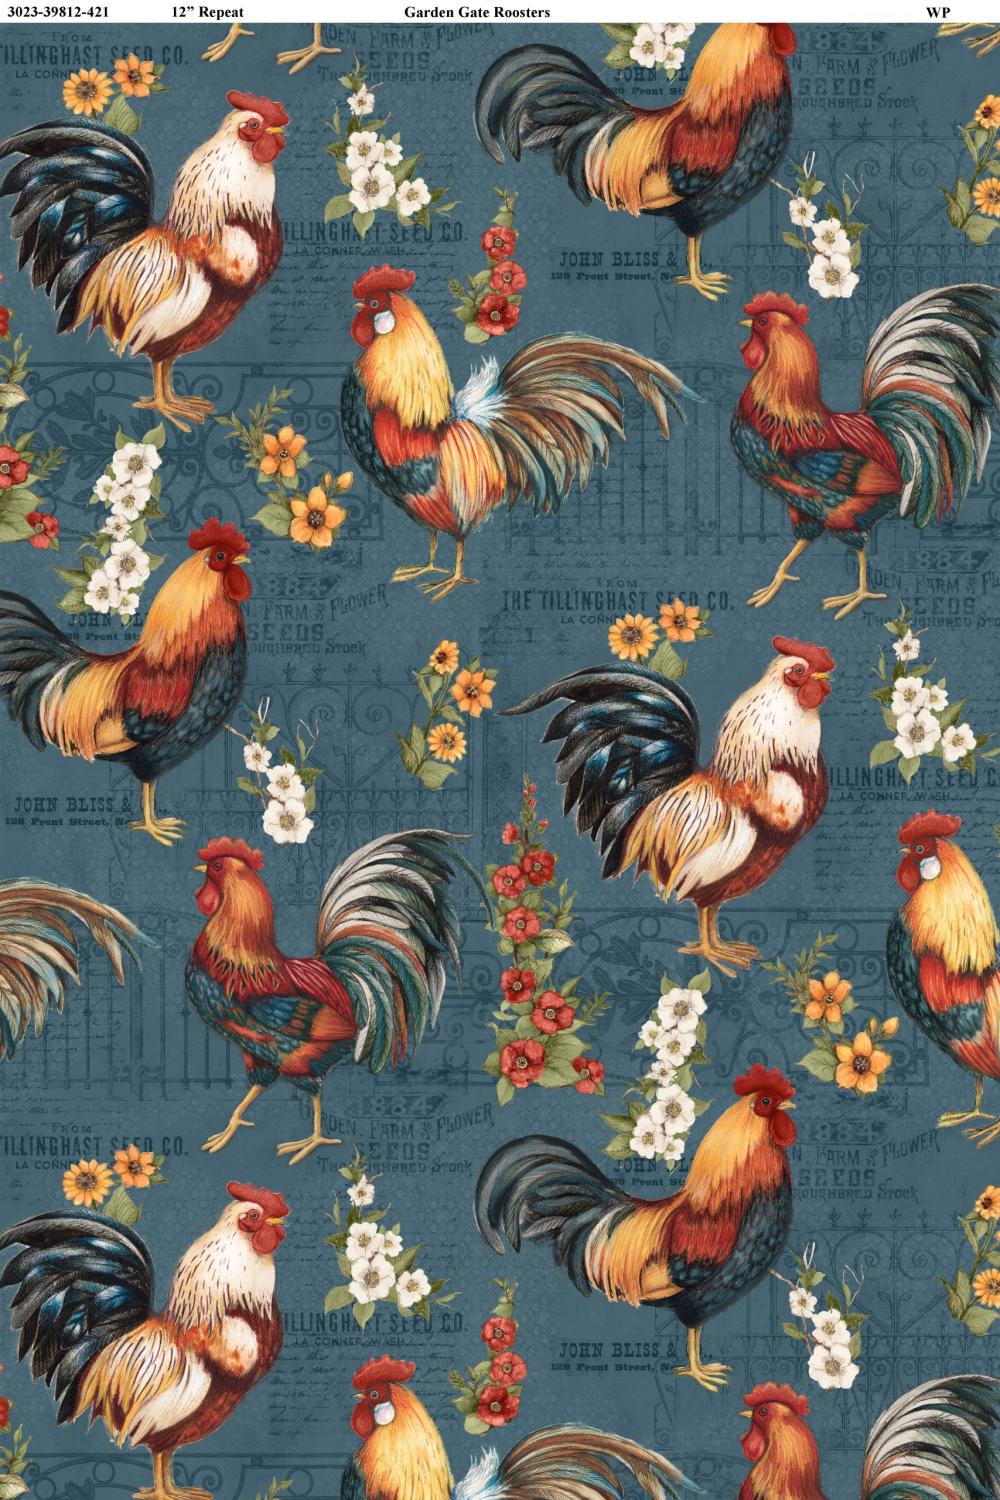 Garden Gate Roosters Lg All Over Teal